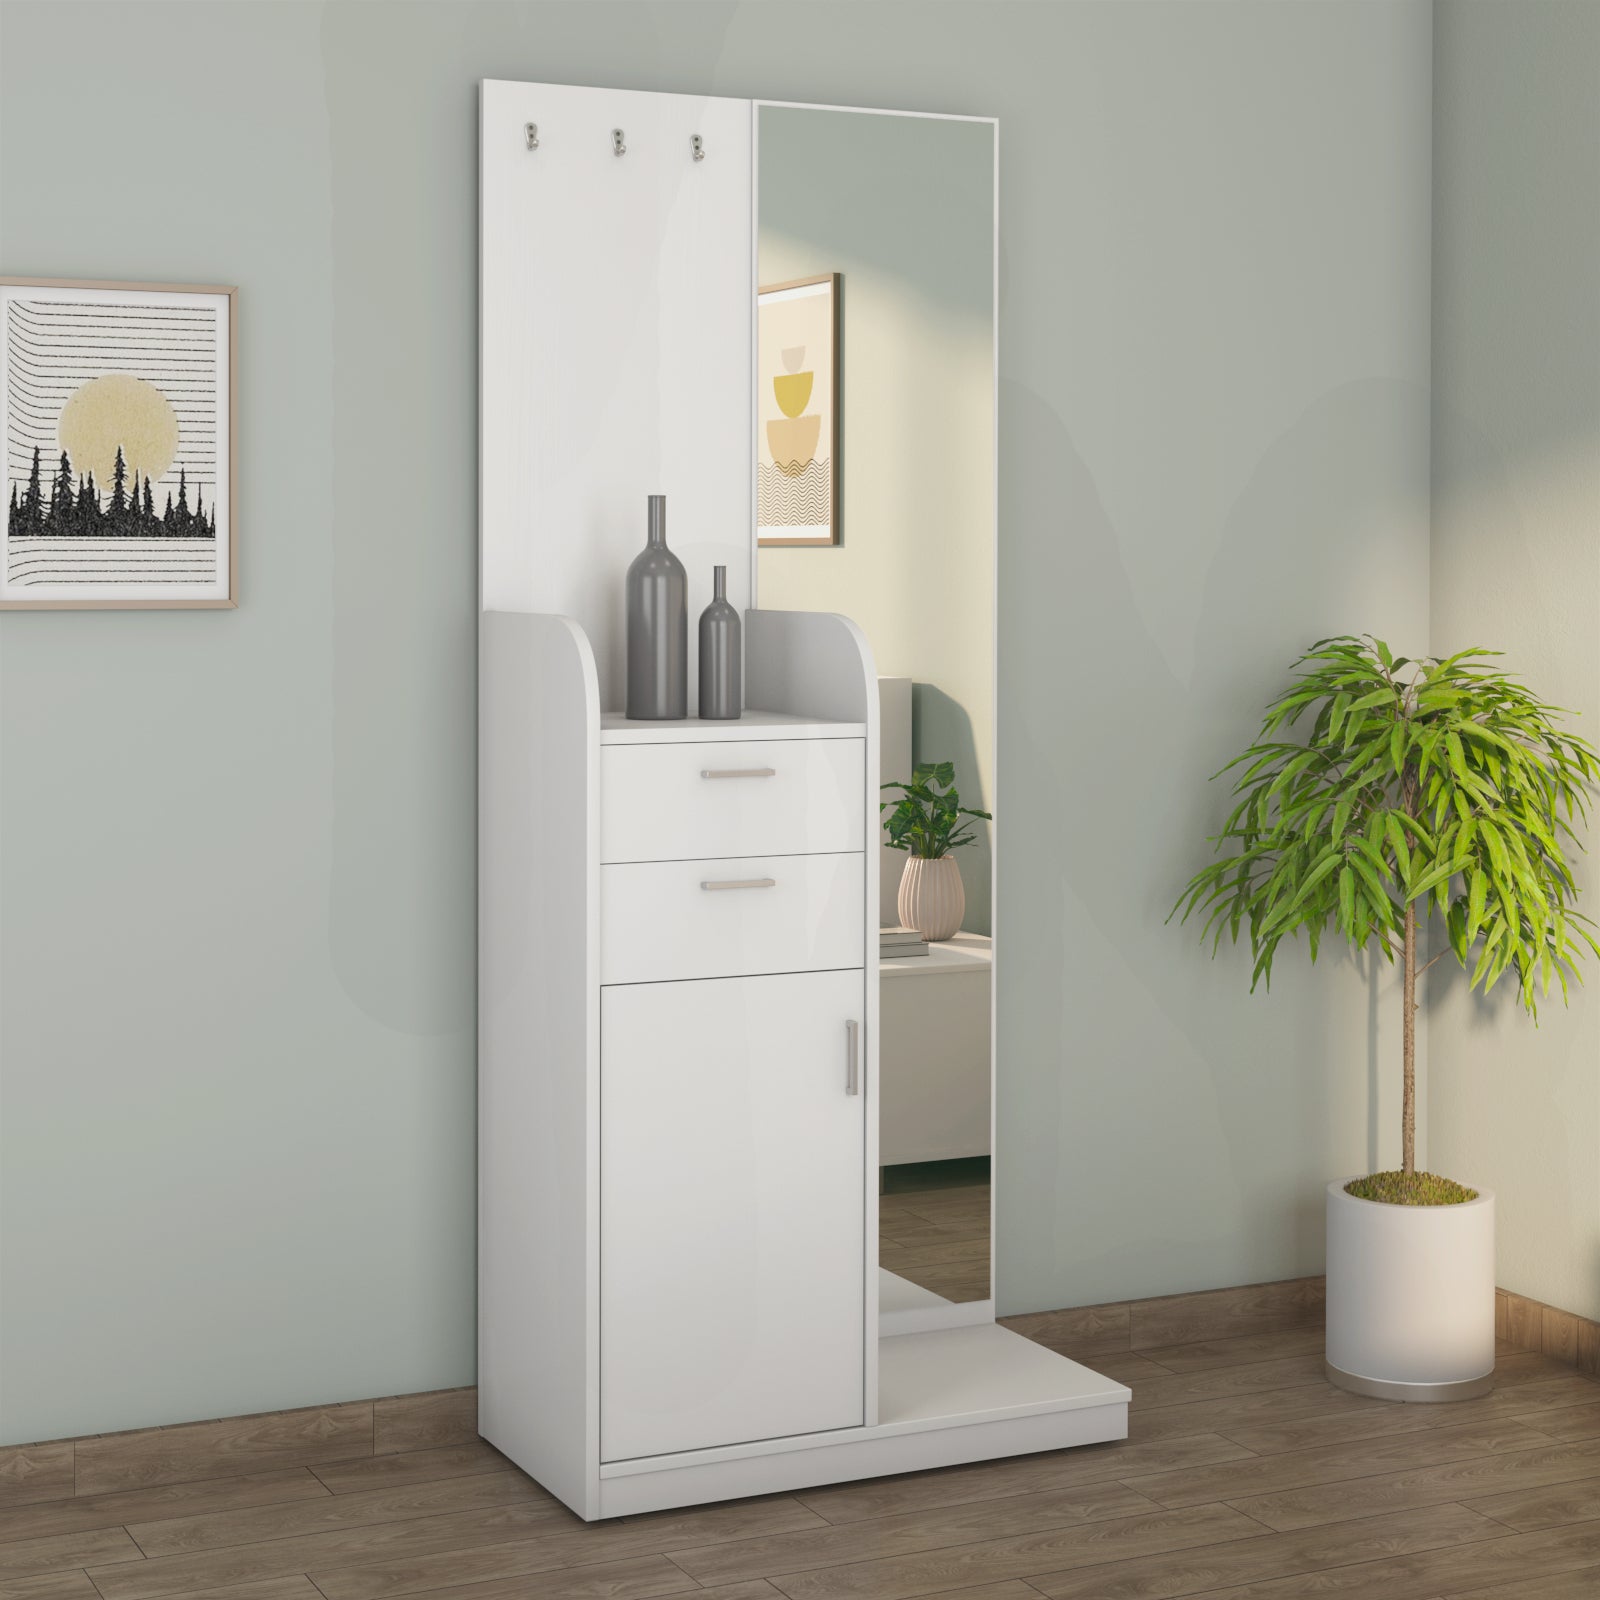 Max Engineered Wood Dresser with Mirror (Frosty White)